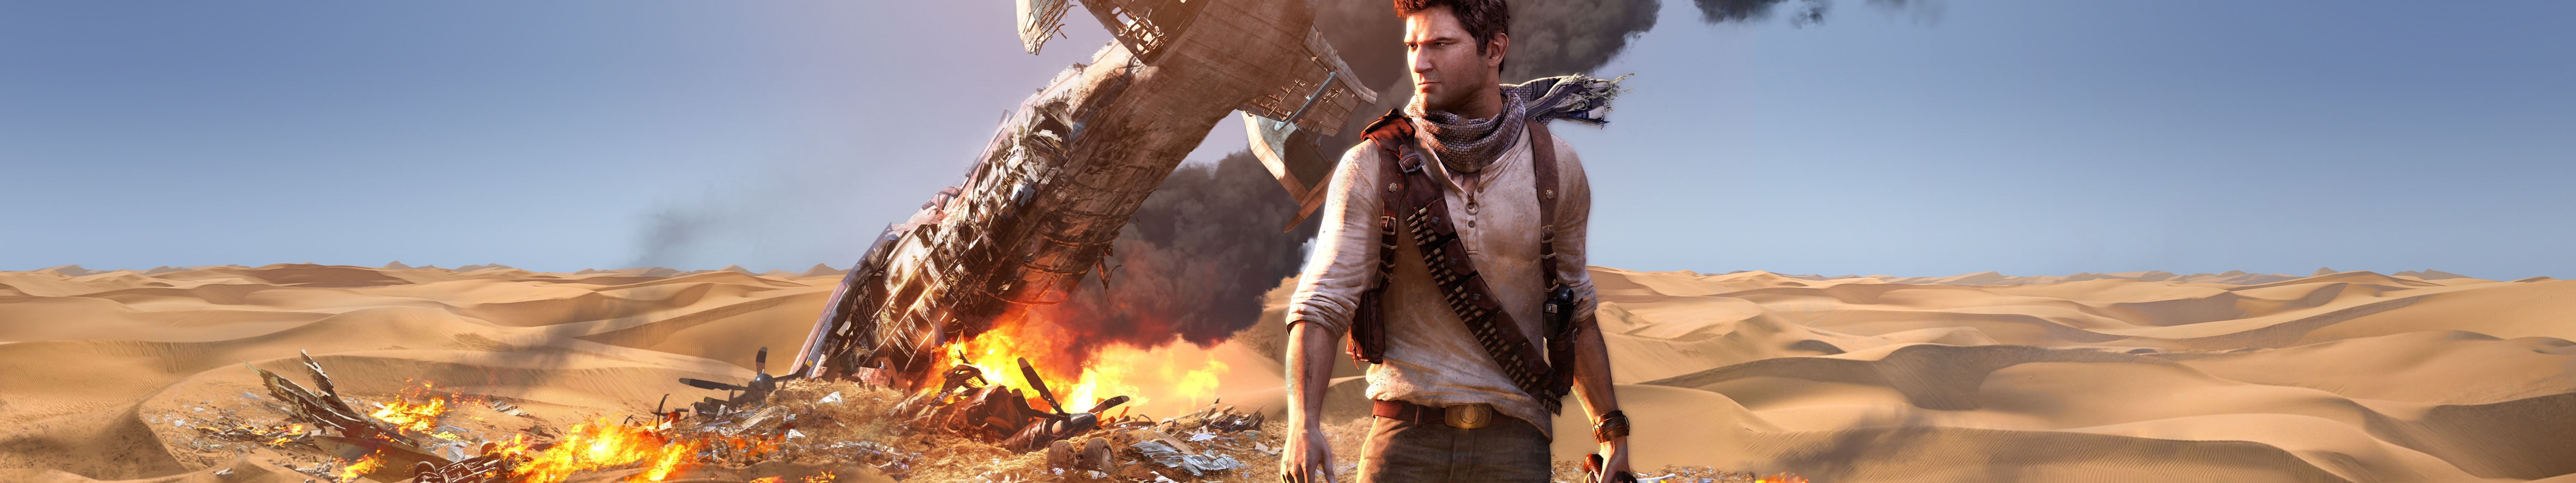 Uncharted Uncharted 3 Drakes Deception Multiple Display Game Poster Video Games Naughty Dog 7680x1440